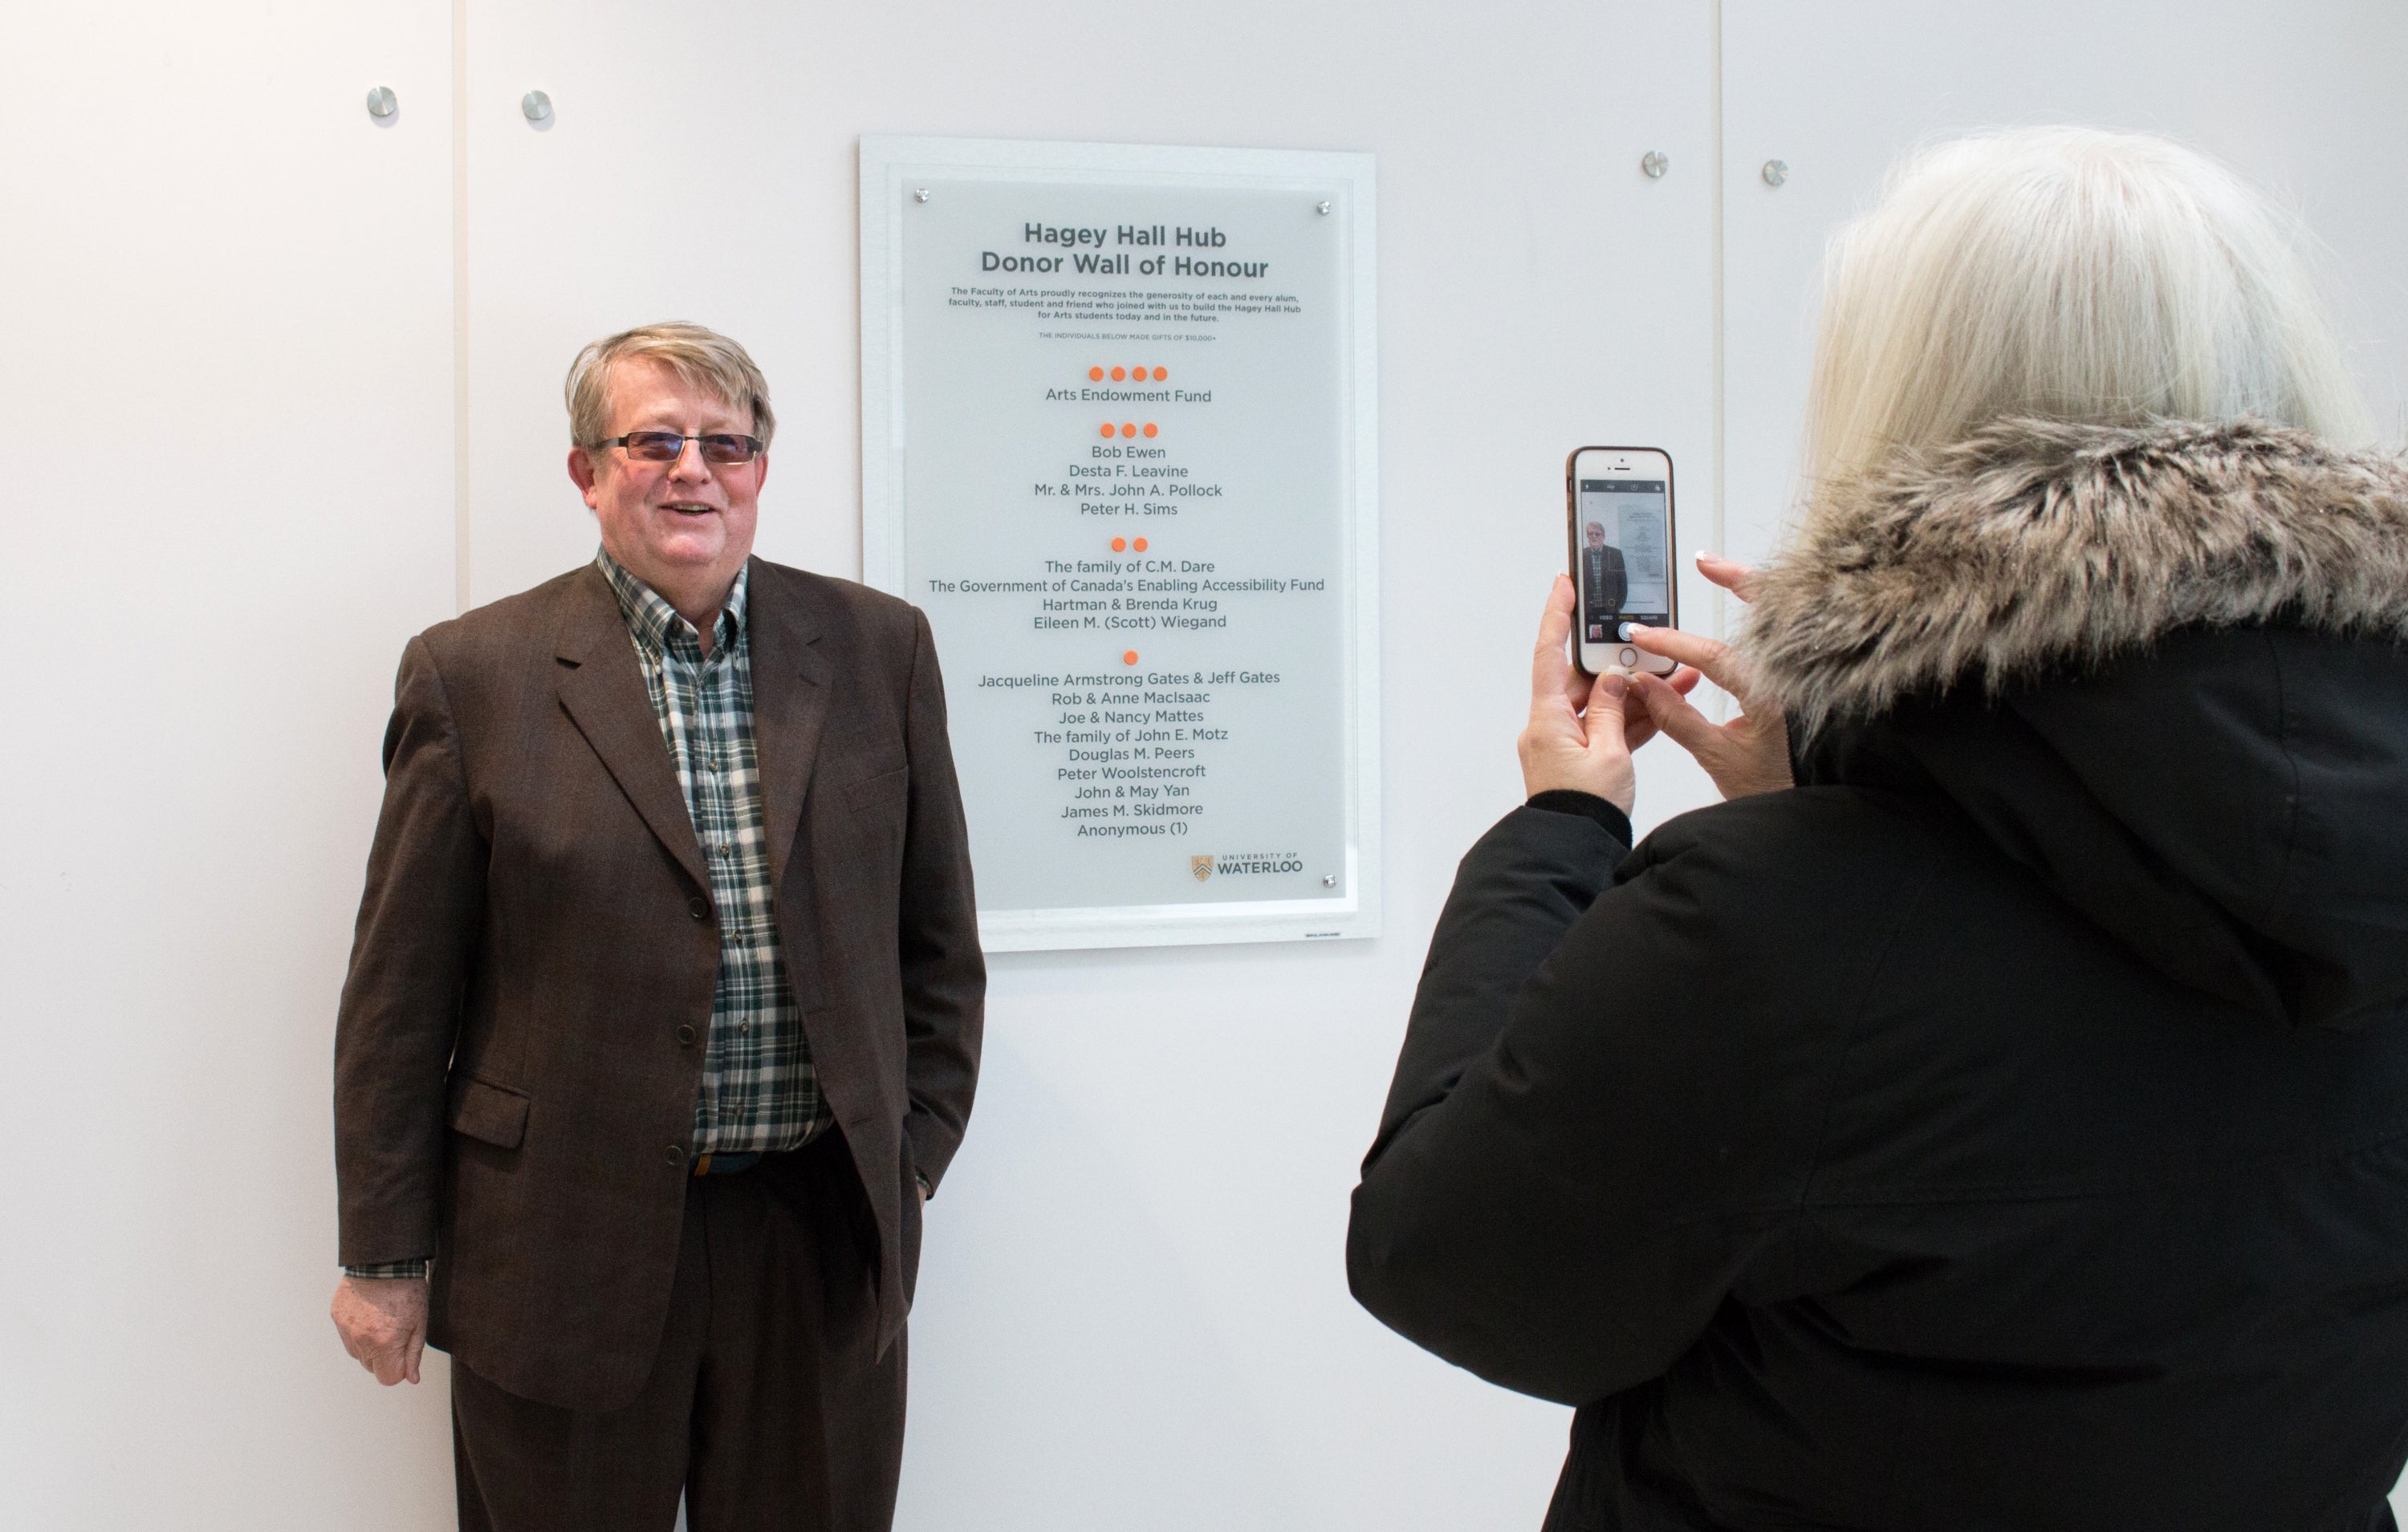 Professor Emeritus taking a photo next to the Donor Wall plaque